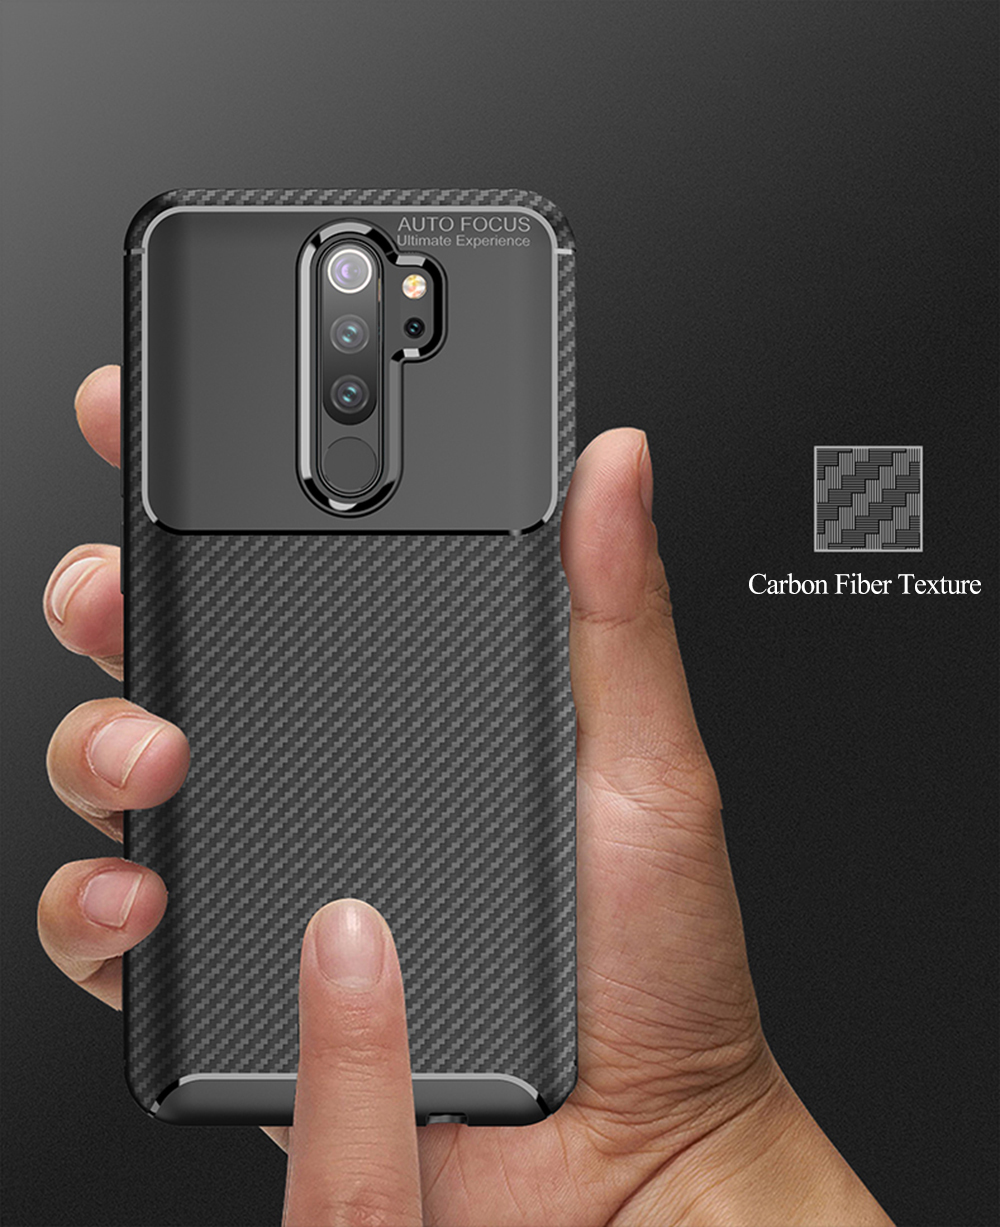 For-Xiaomi-Redmi-Note-8-Pro-Case-Bakeey-Luxury-Carbon-Fiber-Shockproof-Silicone-Protective-Case-Non--1602784-7